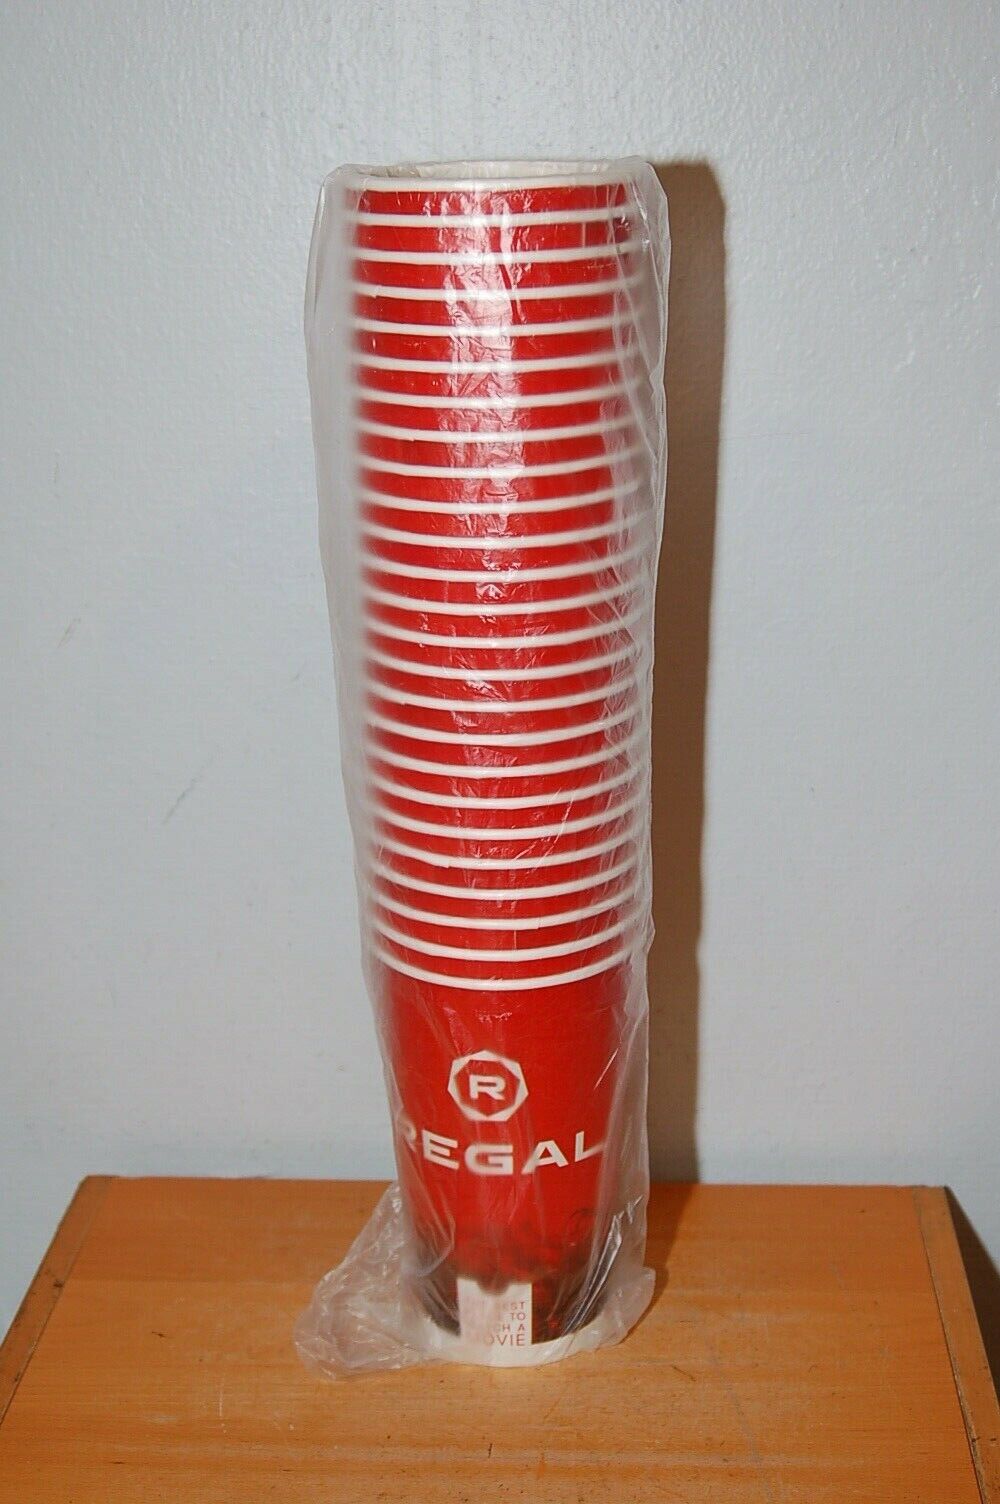 NEW Regal Theaters 44oz Coca Cola Promotional Pack of 25